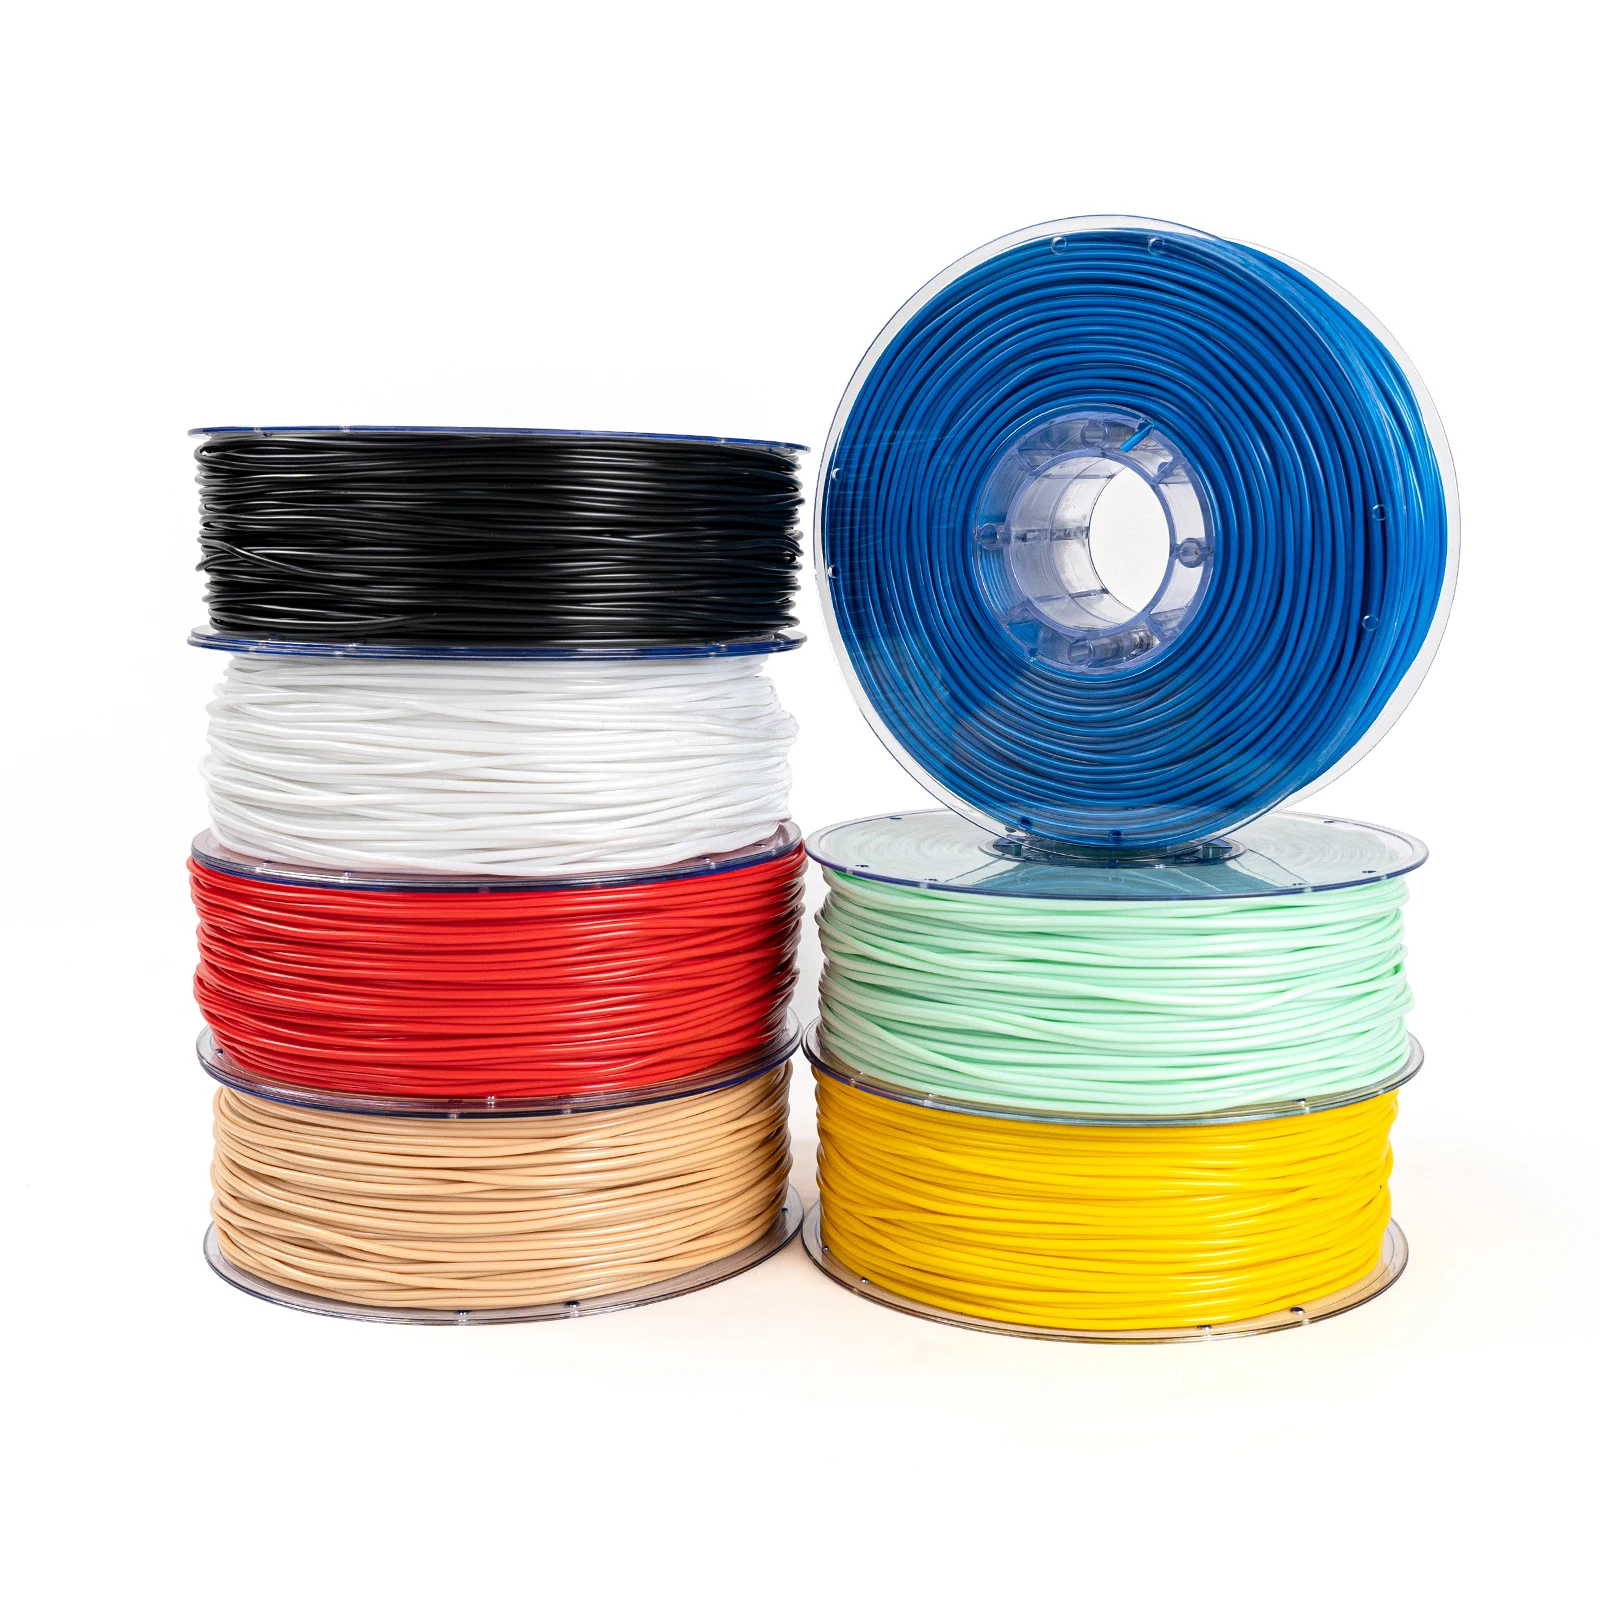 TPR Filament Hermoplastic Rubber Material 3D Printer Filament Rubber Consumables Material Replacement Used for 3D Printer